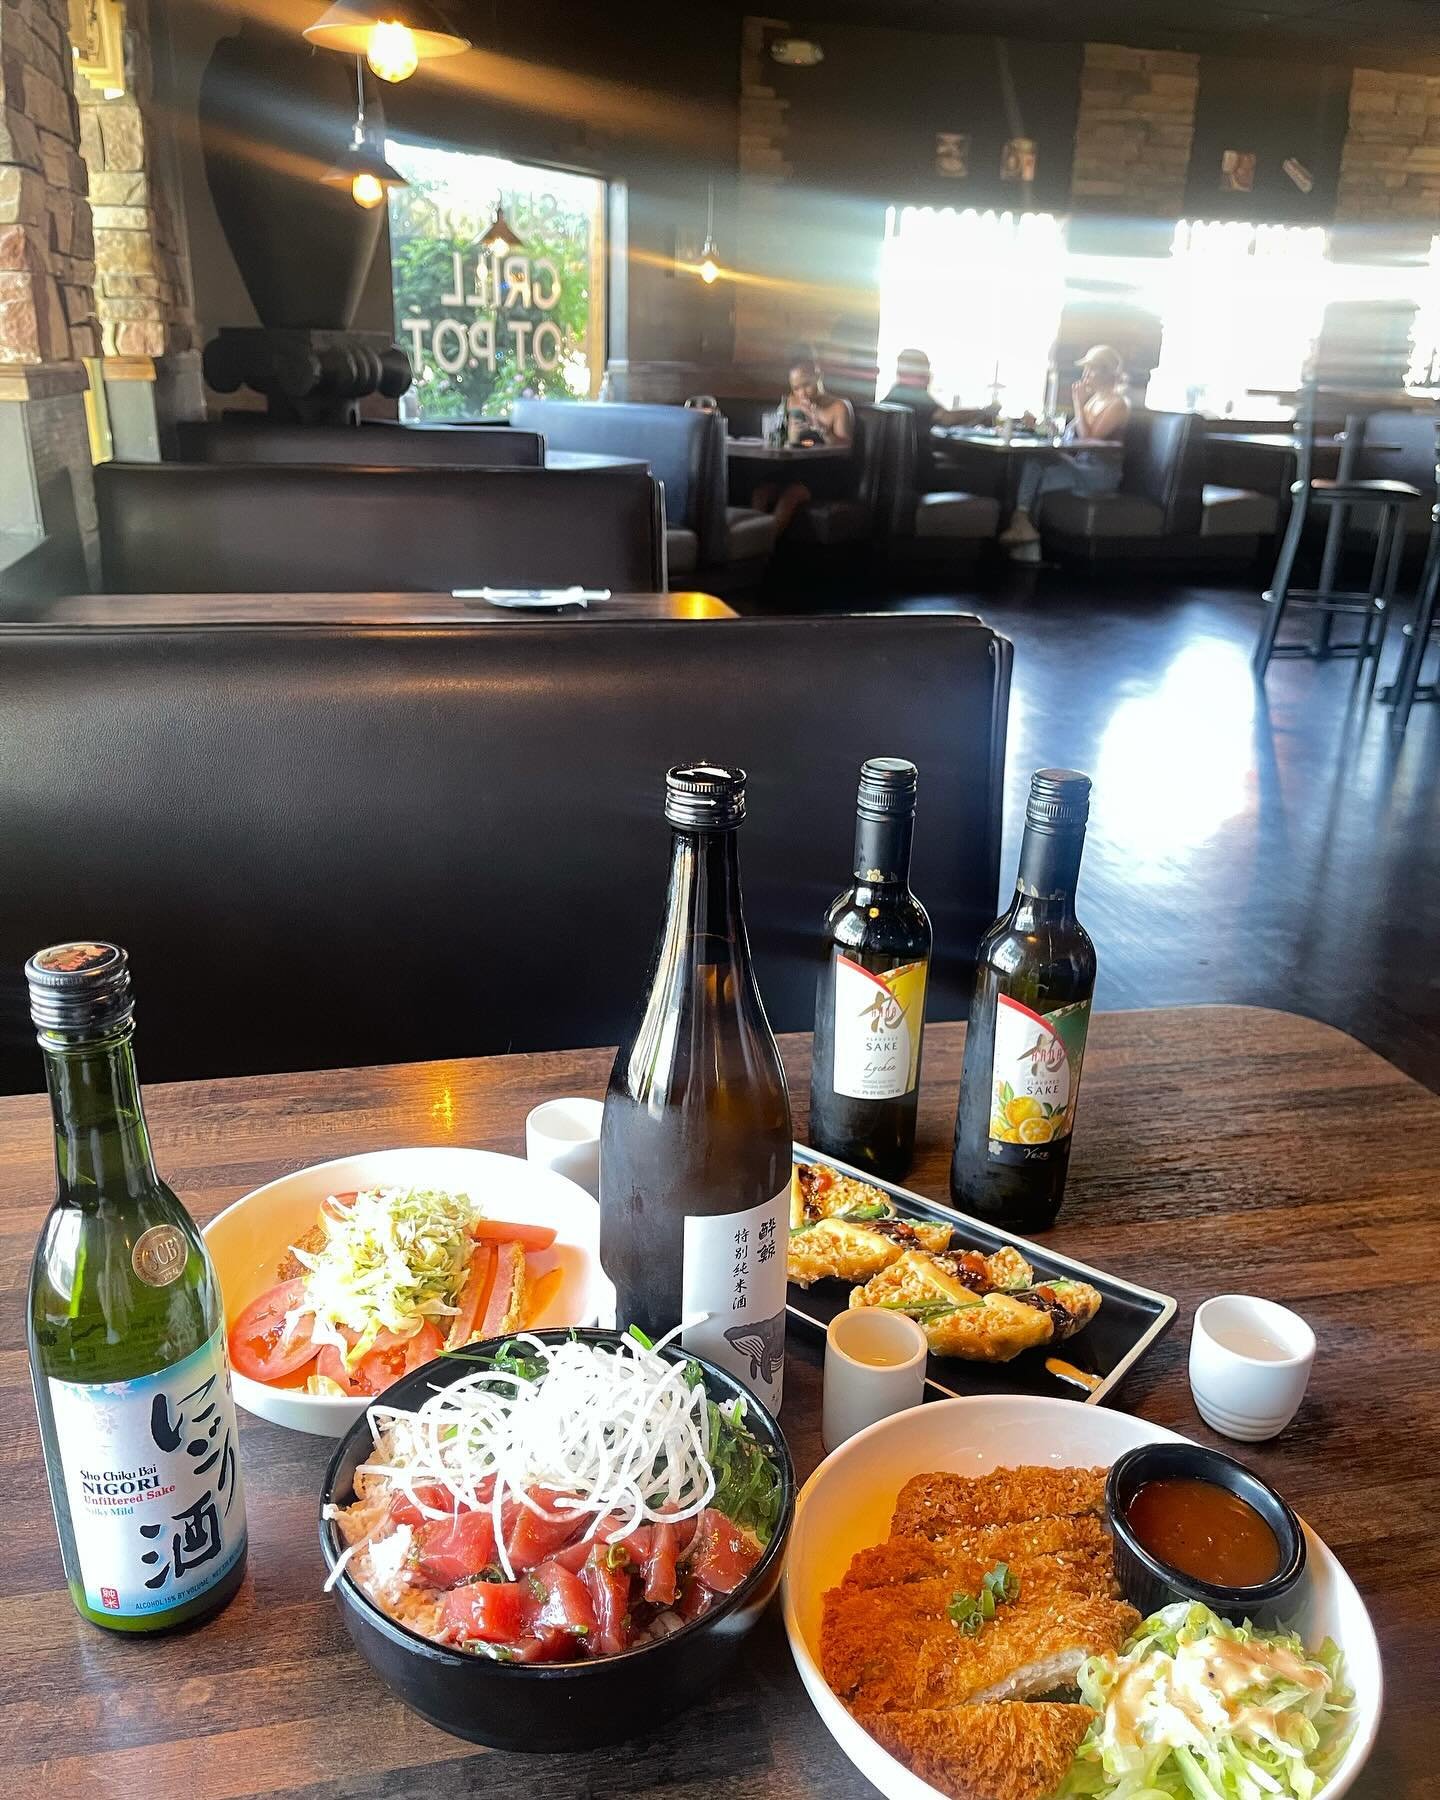 Find your combination at Zu Izakaya

We recommend a combo of an appetizer, a hot pot, a couple sushi rolls, and sake!

Happy Hour at Zu Izakaya is from 4pm - 7pm then 9pm - 11pm! (Ends at 9:30pm on Sundays, excluding Holidays) get $9.95 sakebombs, un